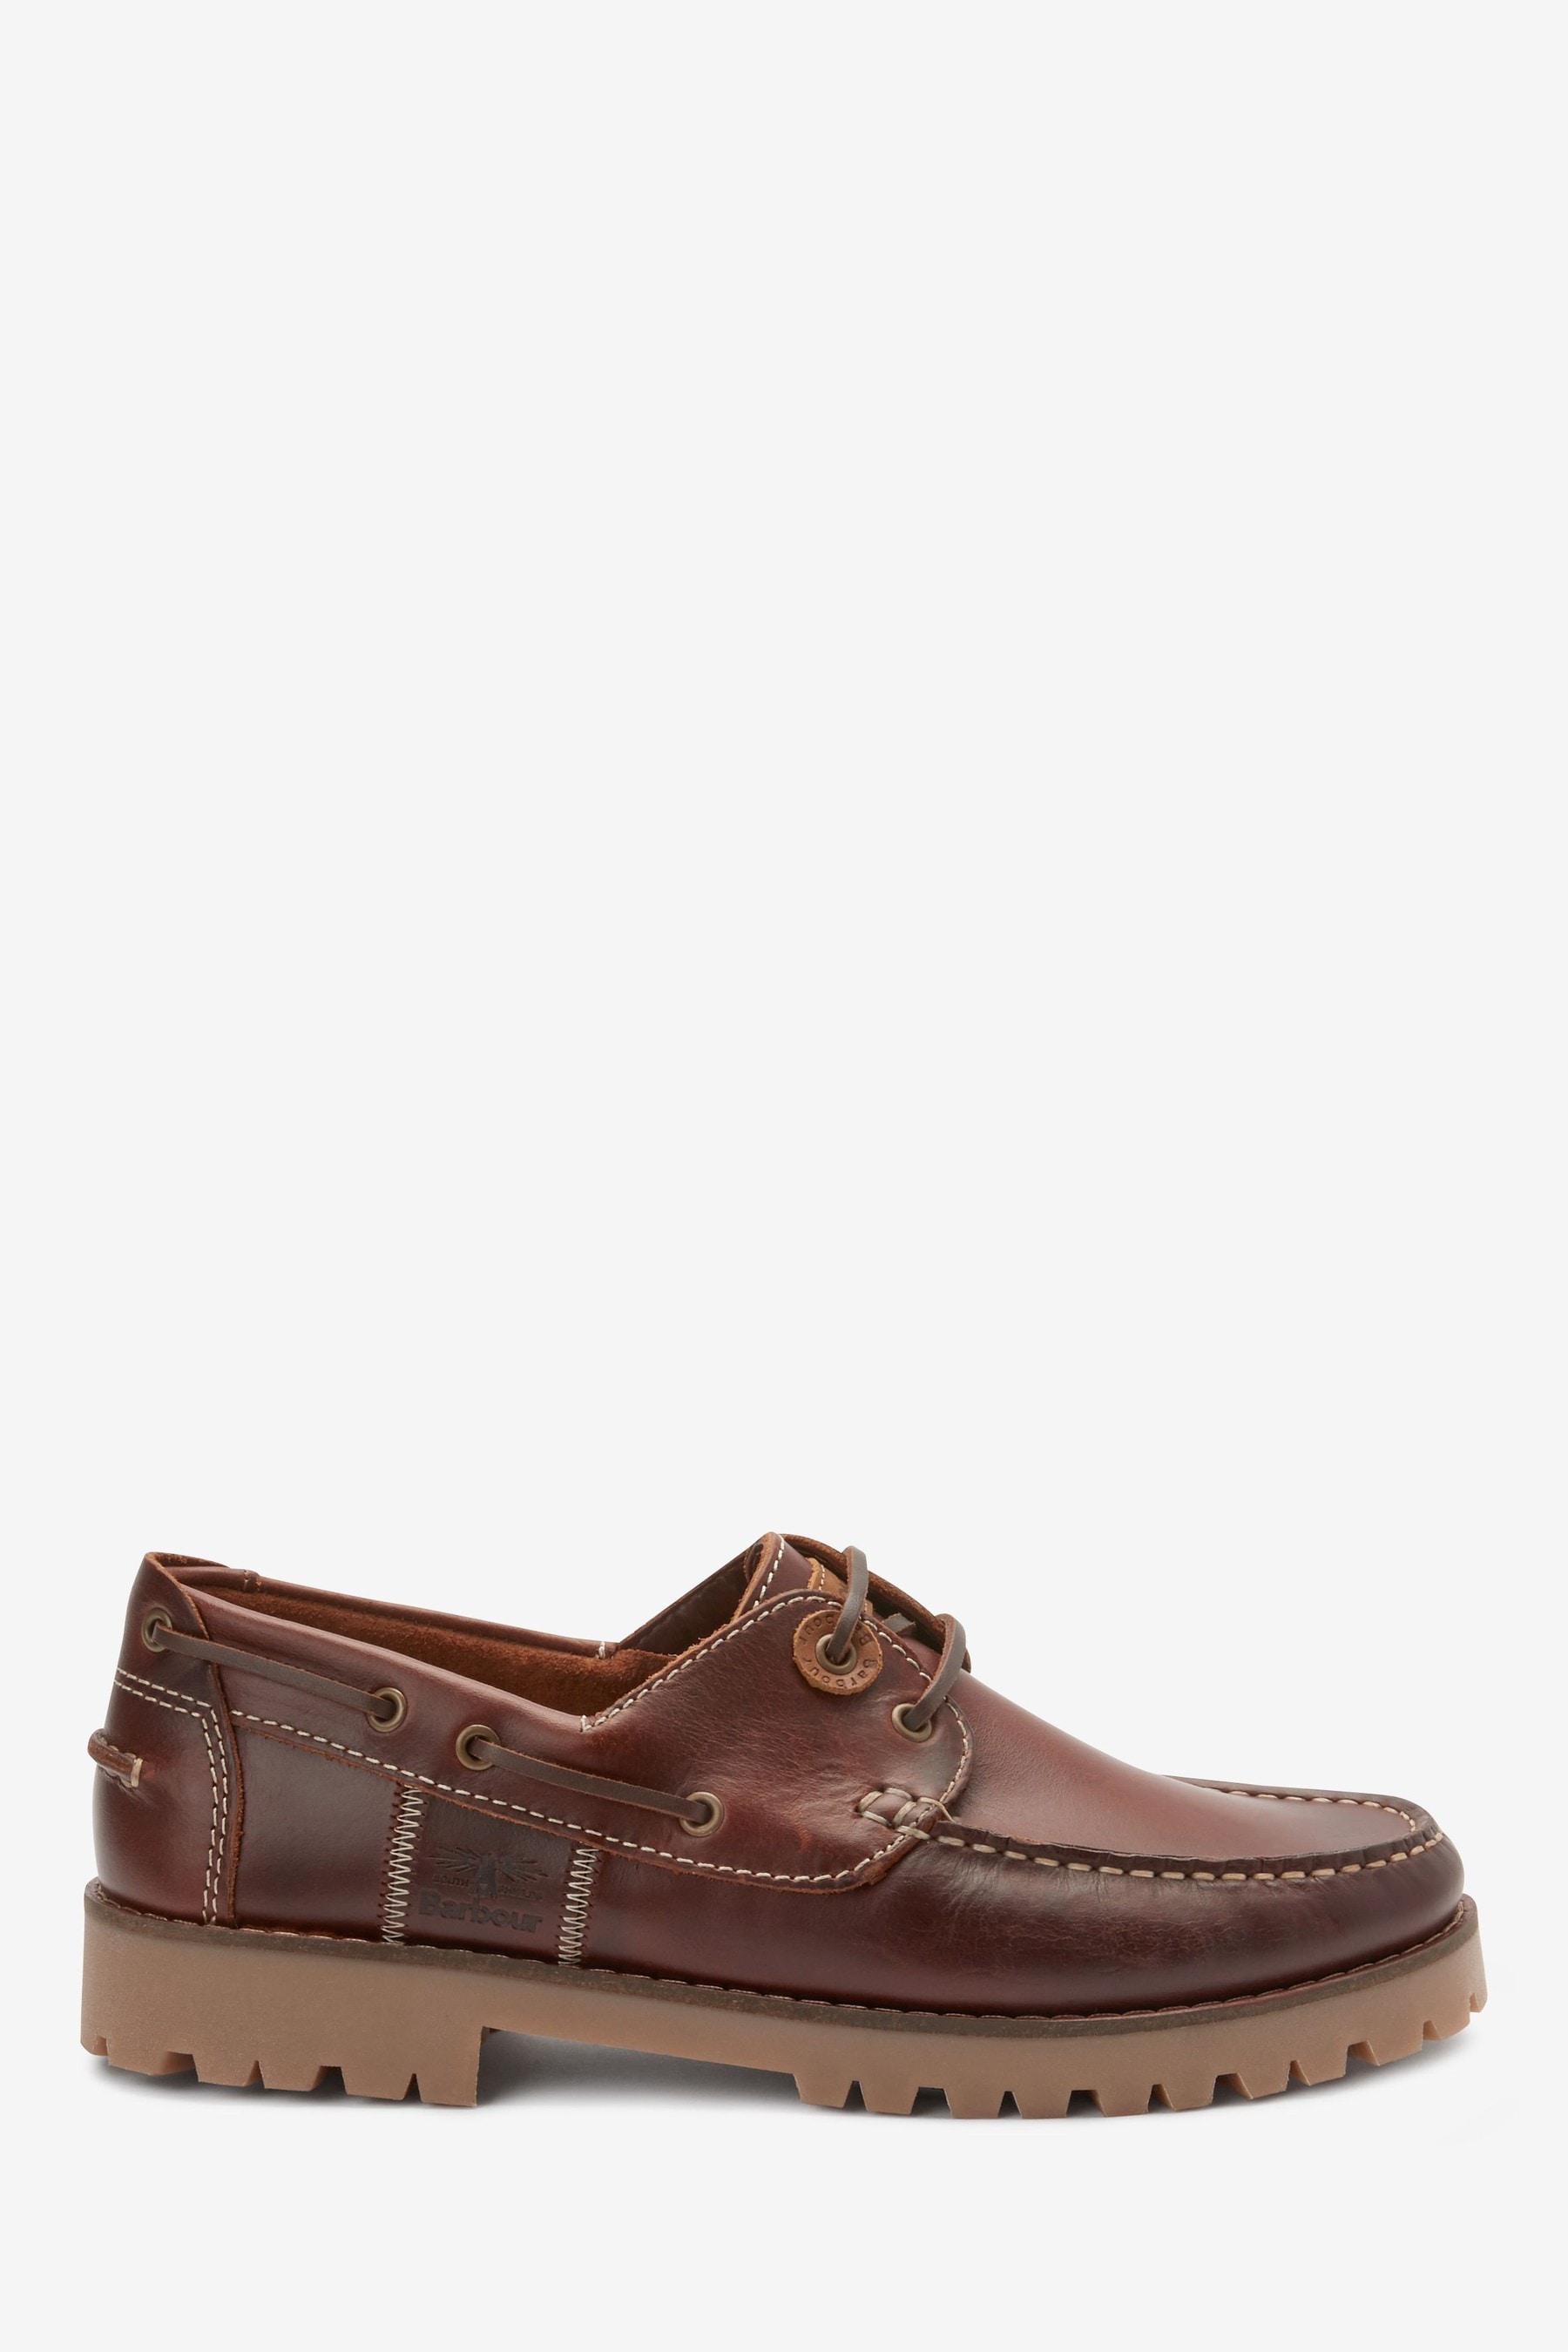 Buy Barbour® Brown Stern Boat Shoes from the Next UK online shop